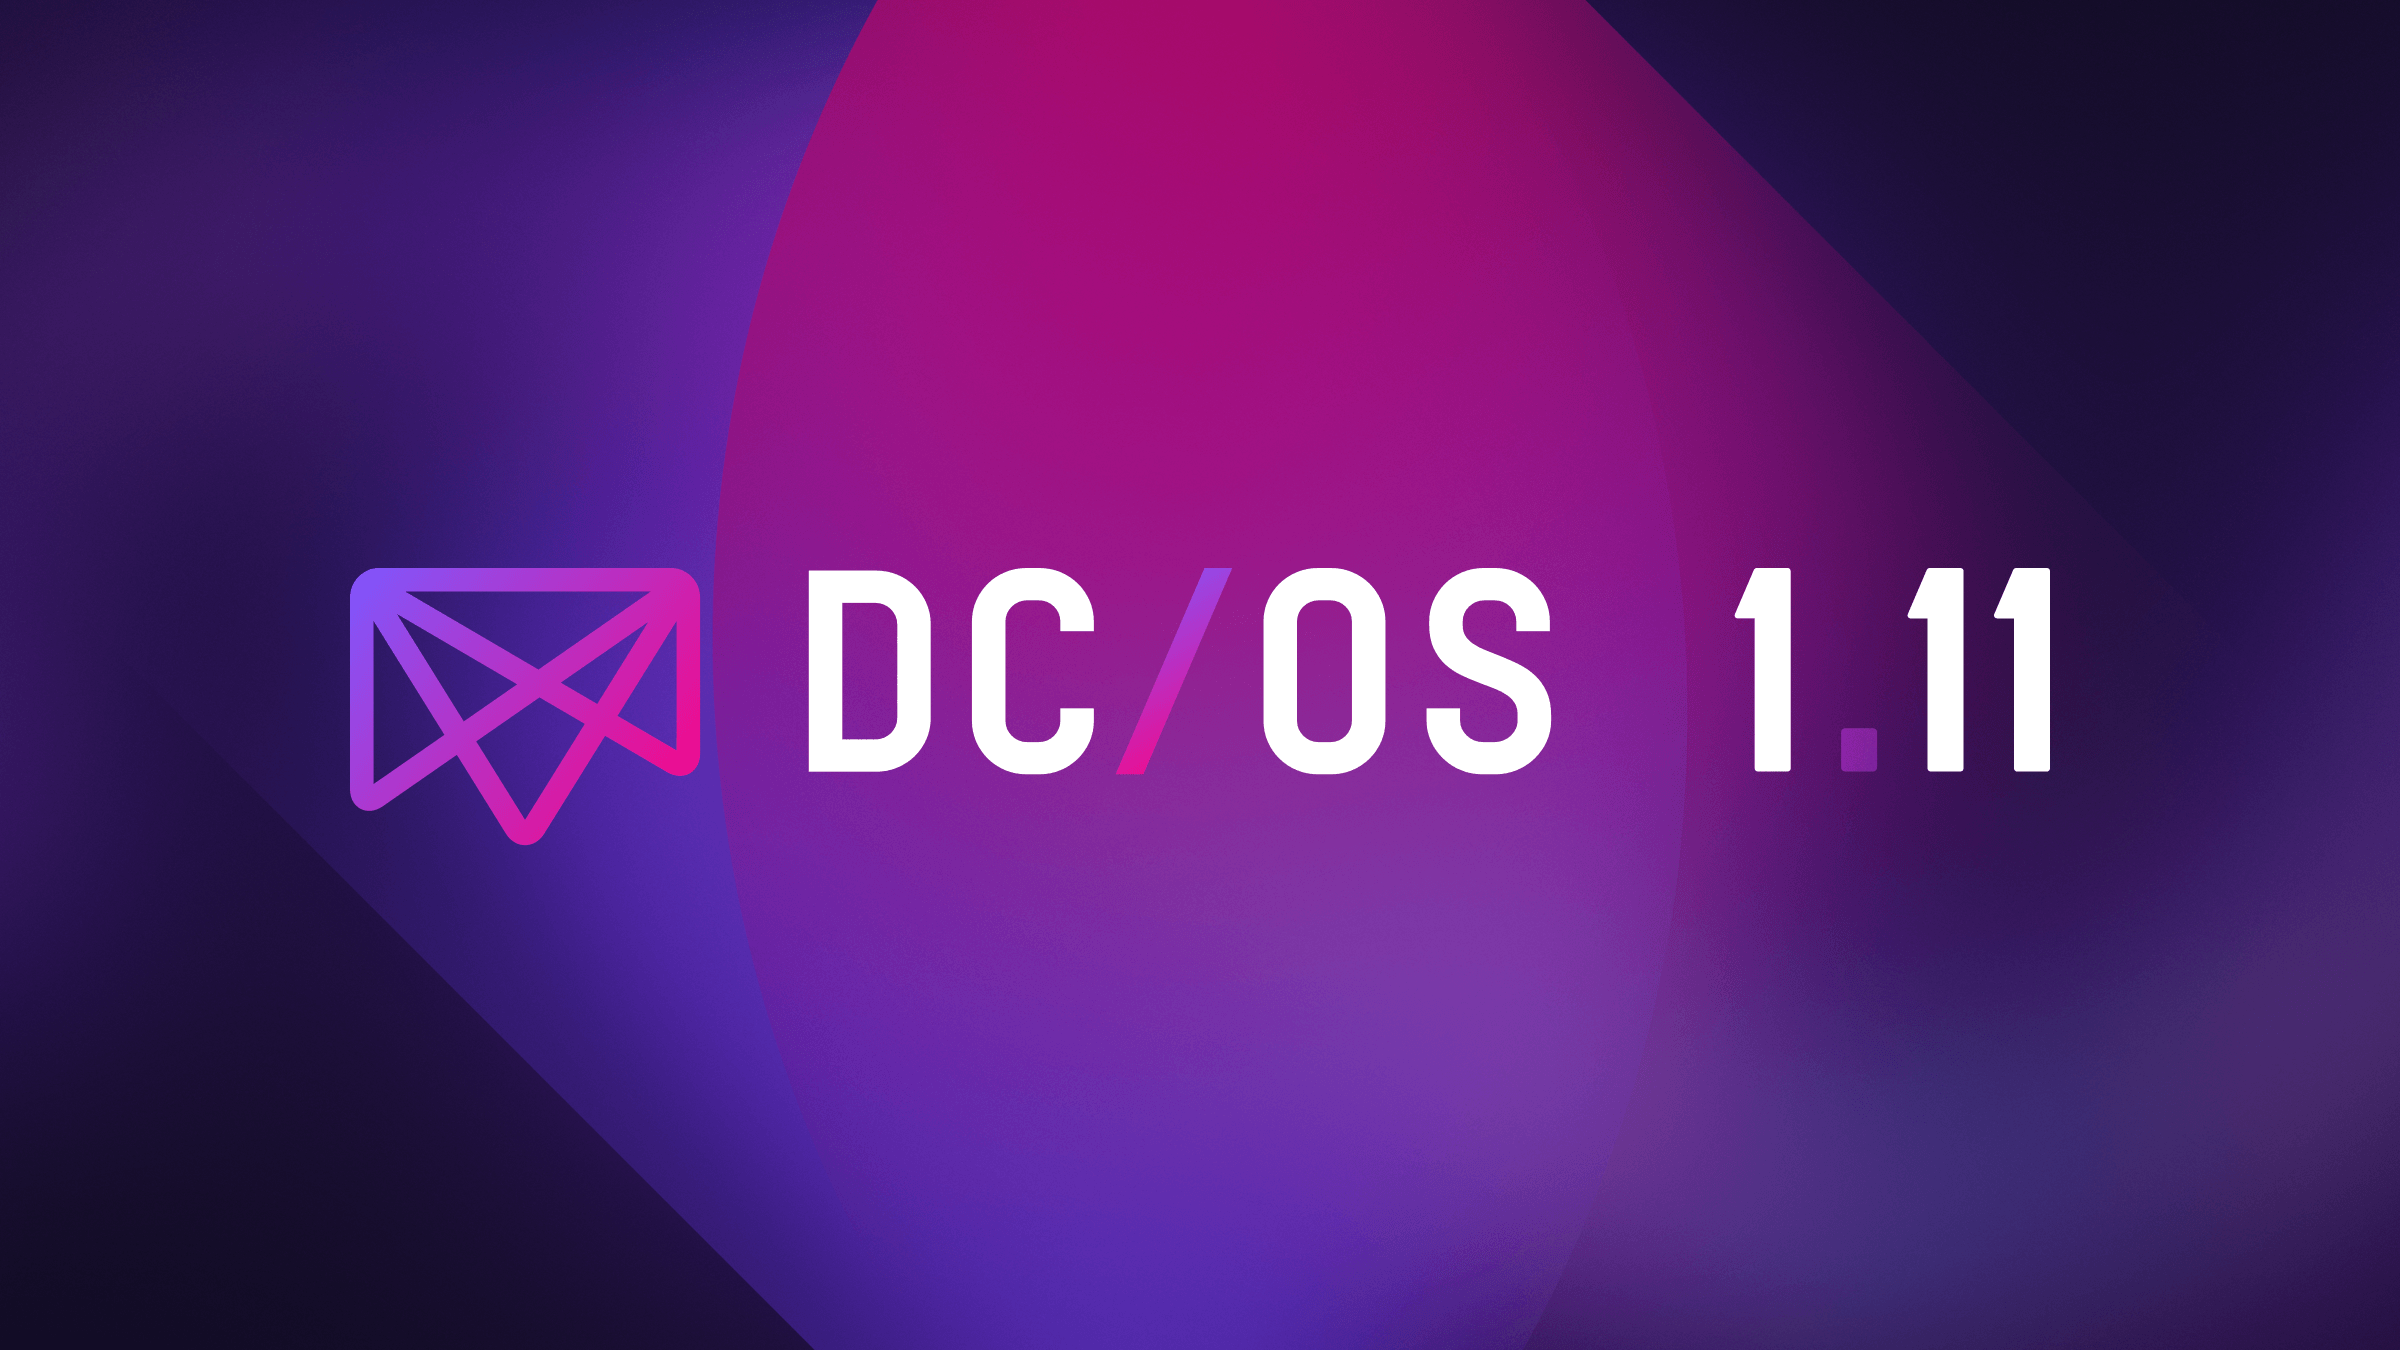 Mesosphere Logo - Announcing DC/OS 1.11: Edge & Multi-Cloud Operations Now a Reality